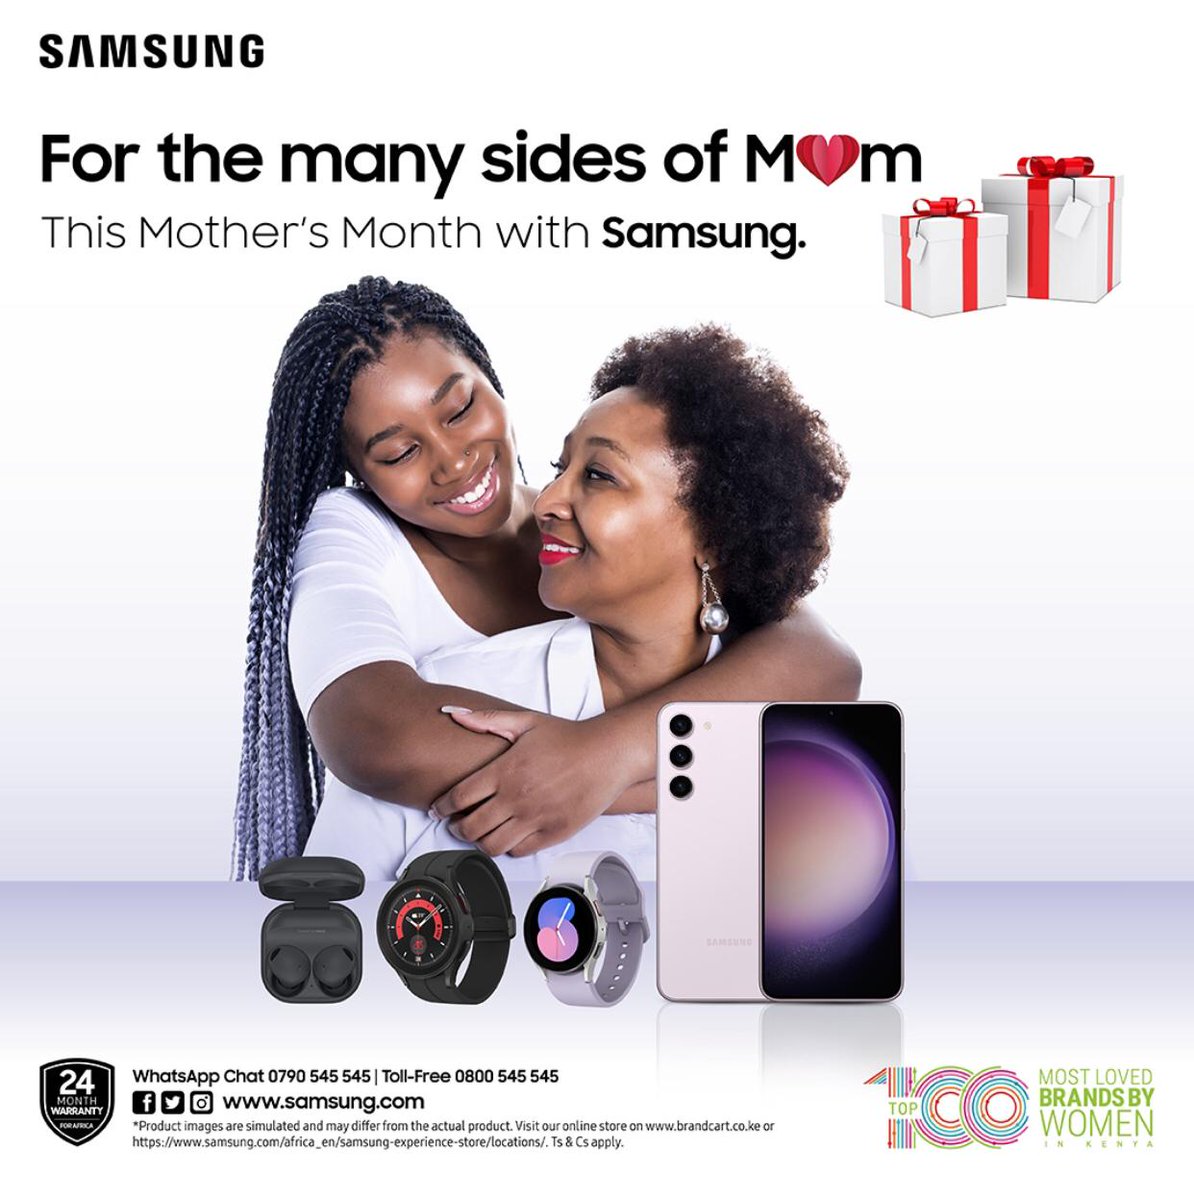 What better way to celebrate Mother's Month than with offers from @SamsungMobileKE!🎁 Take advantage of incredible discounts on Samsung phones! and create a truly memorable day for your mom.
Click here to buy now:
linktr.ee/samsungkenya
#InclusivityForAll #GalaxyASeriesKE